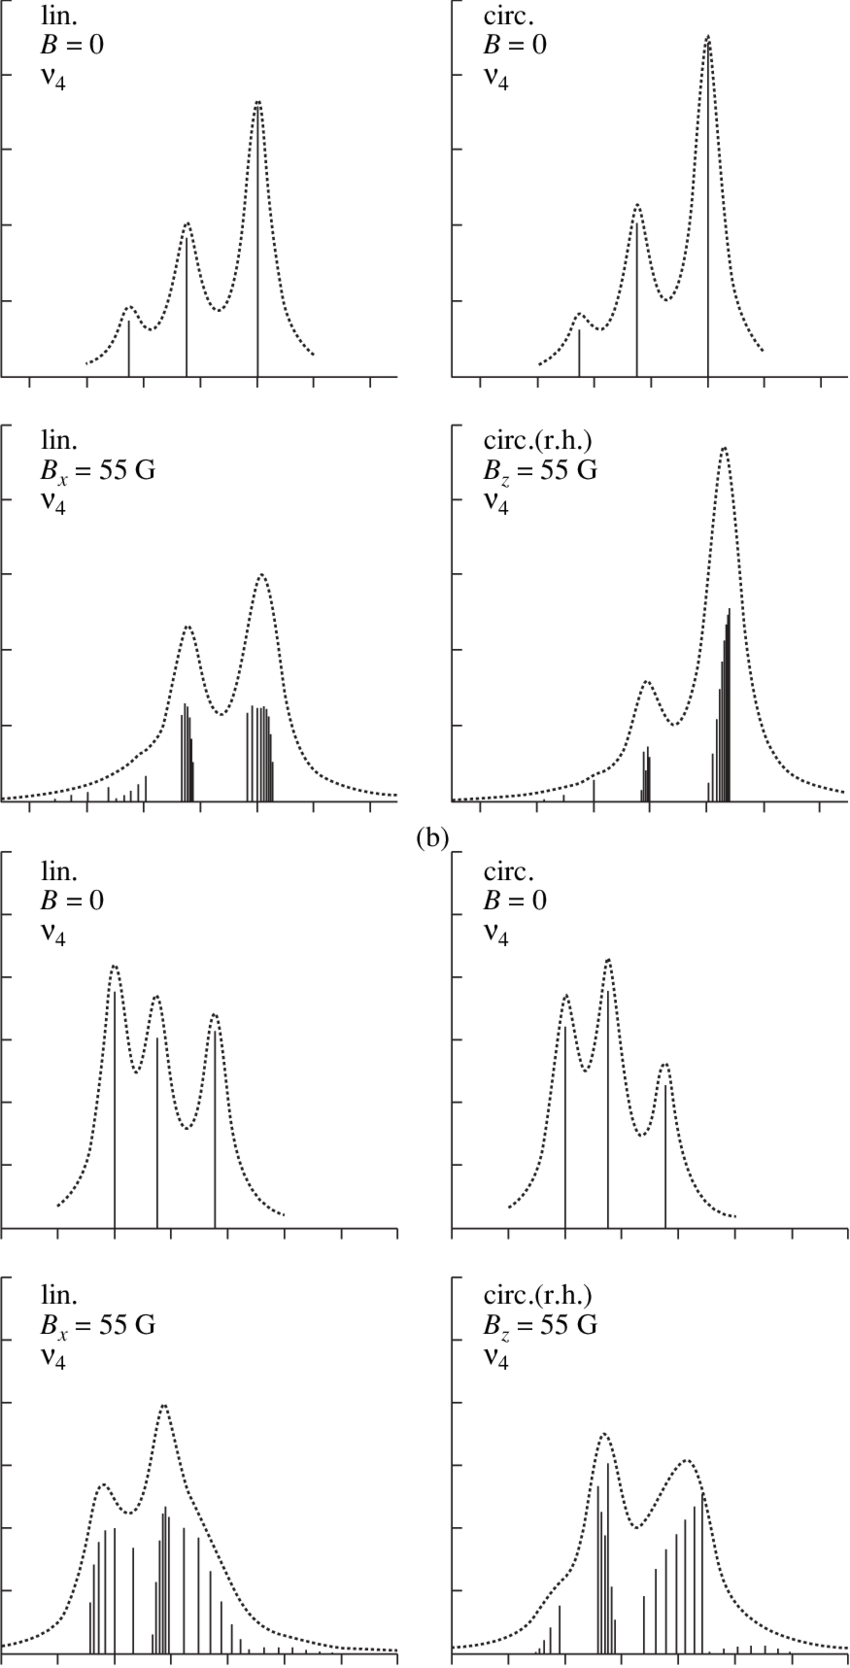 Illustration of the simulation of the fluorescence spectrum for (a) ν 4 and (b) ν 3 transitions. Vertical bars show the relative strength of the individual fluorescence components |F e m〉 |F g µ〉 for B = 0 (upper row) and |γ k m〉 |η j µ〉 for B = 55 Gauss,  